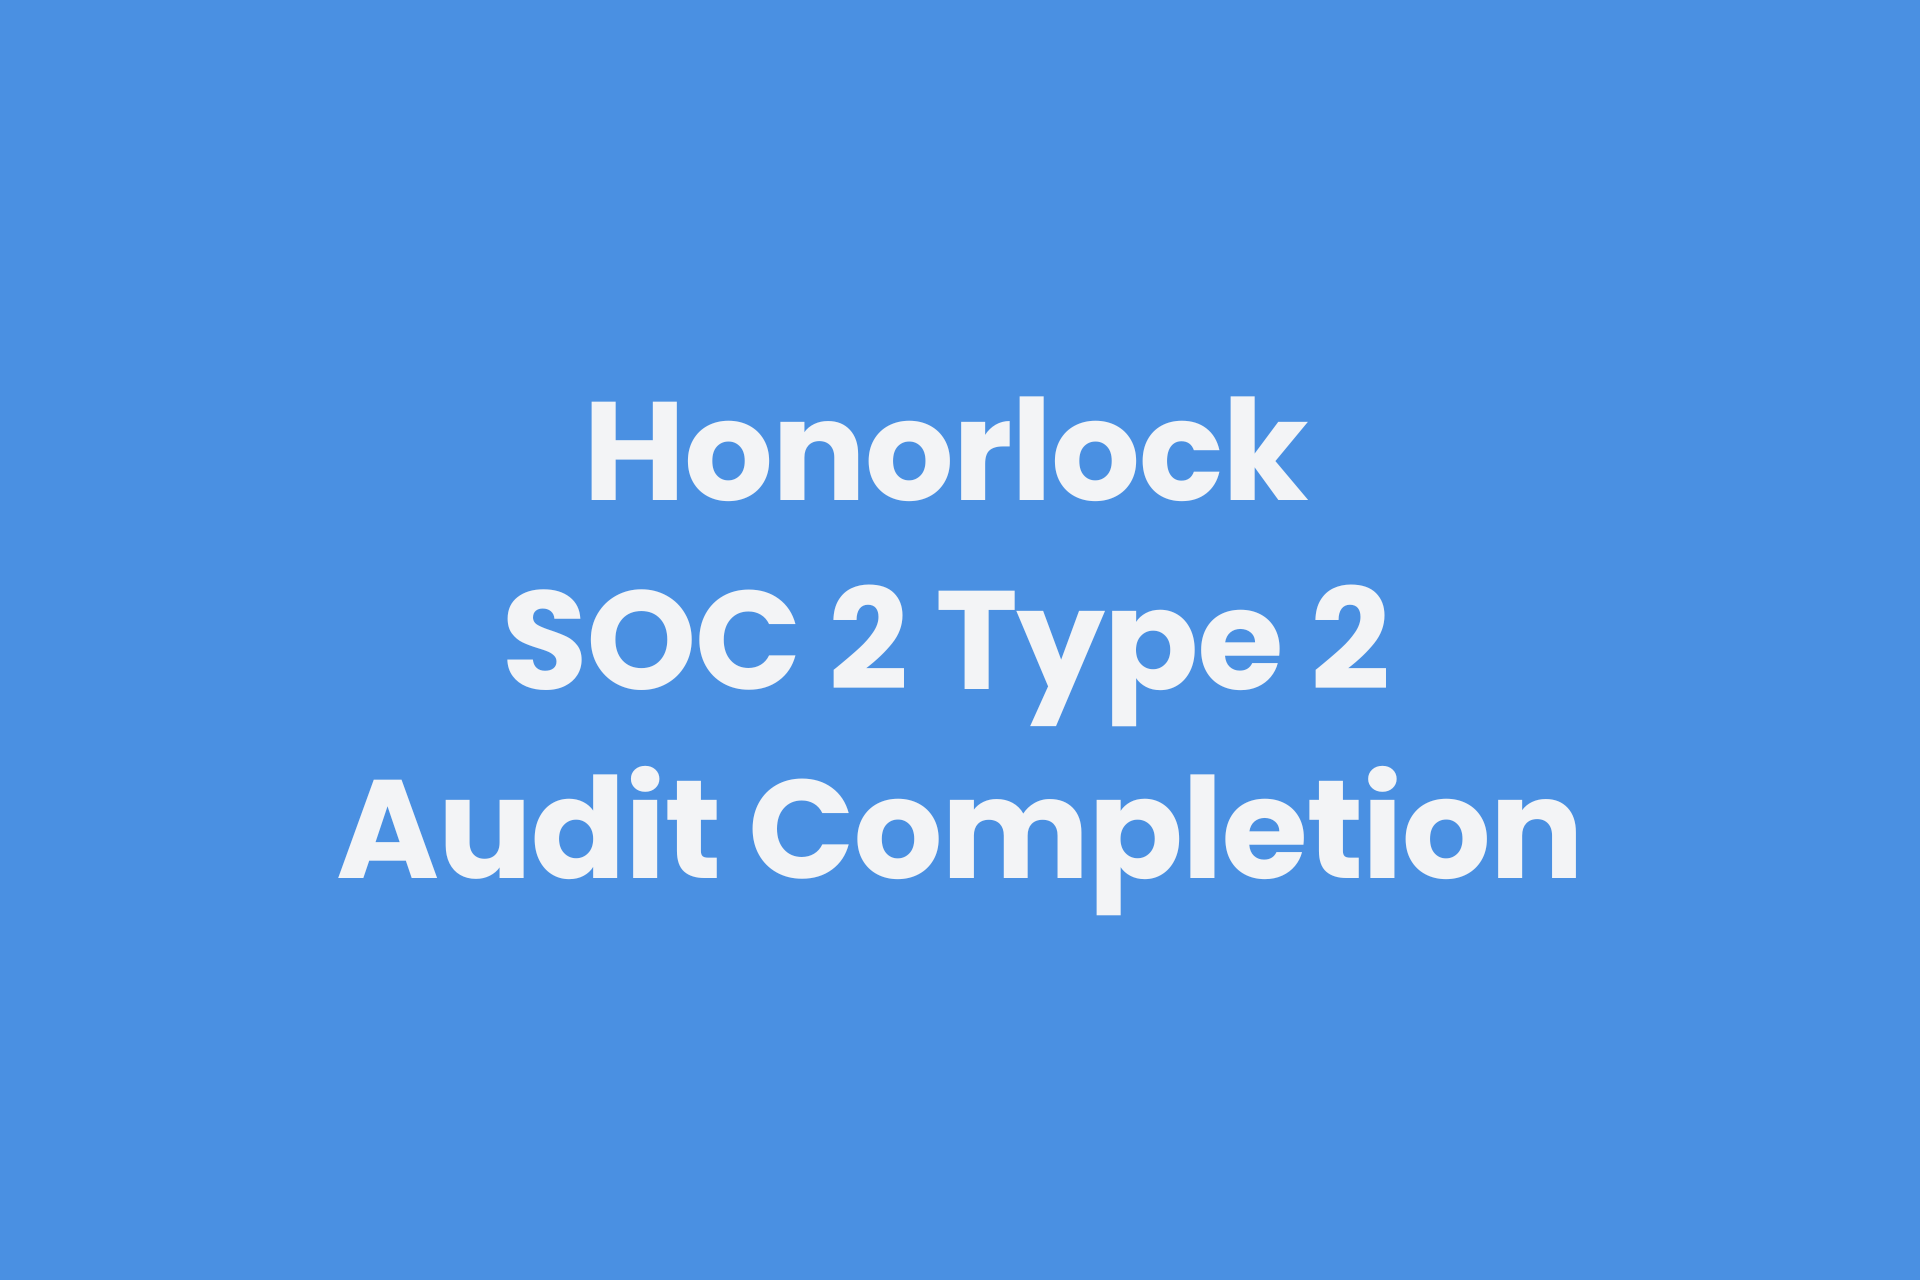 Honorlock completed the SOC 2 Type 2 Audit